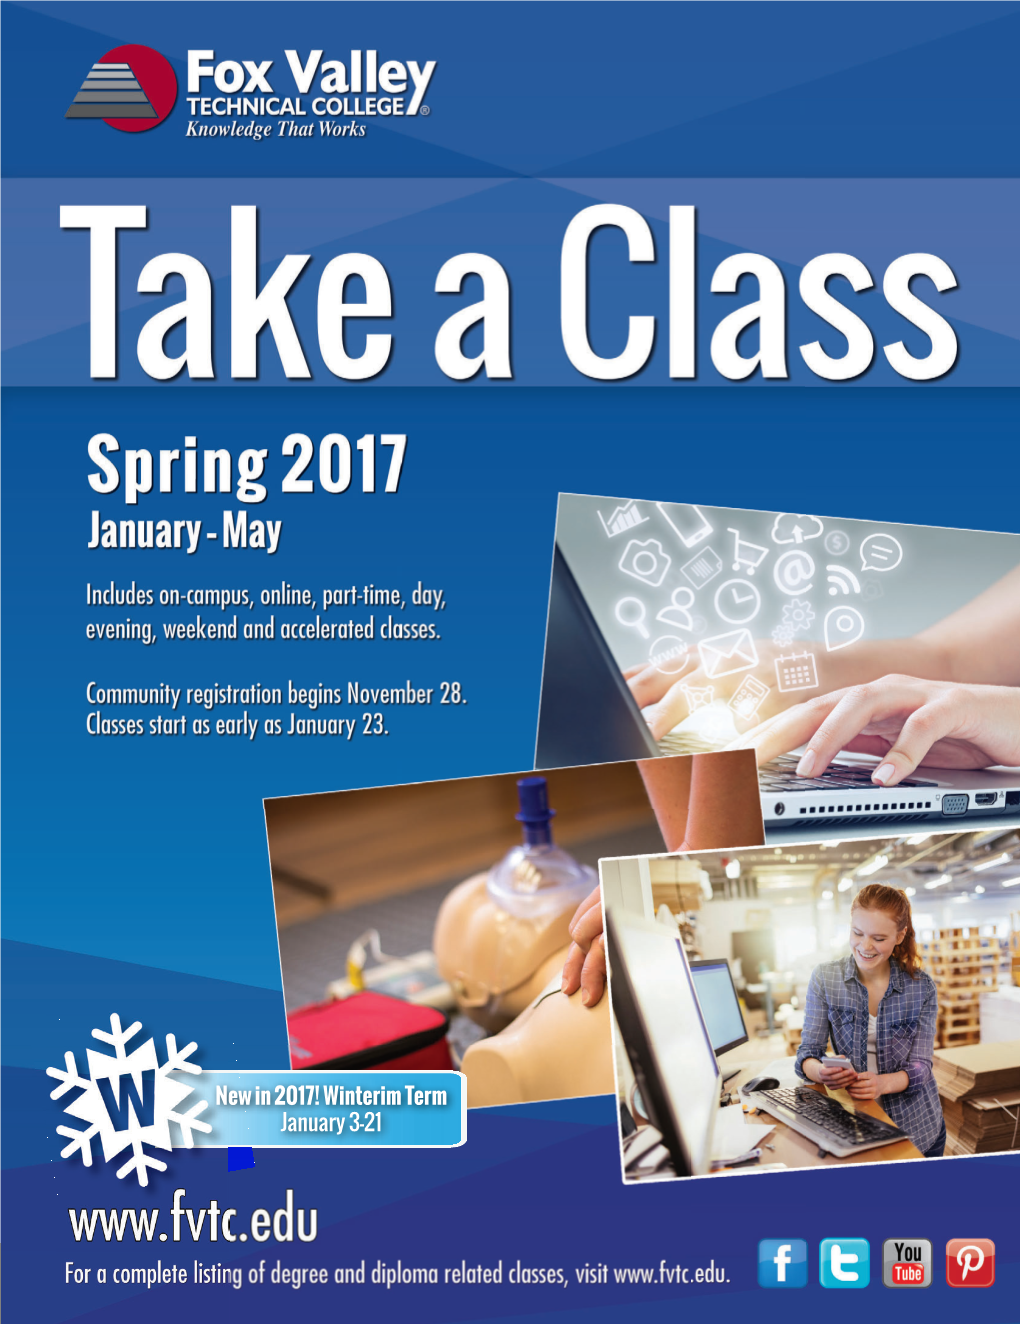 New in 2017! Winterim Term January 3-21 You Want Choices? We’Ve Got Them! Choose from Hundreds of Class Options to Fit Your Budget, Schedule and Learning Styyle